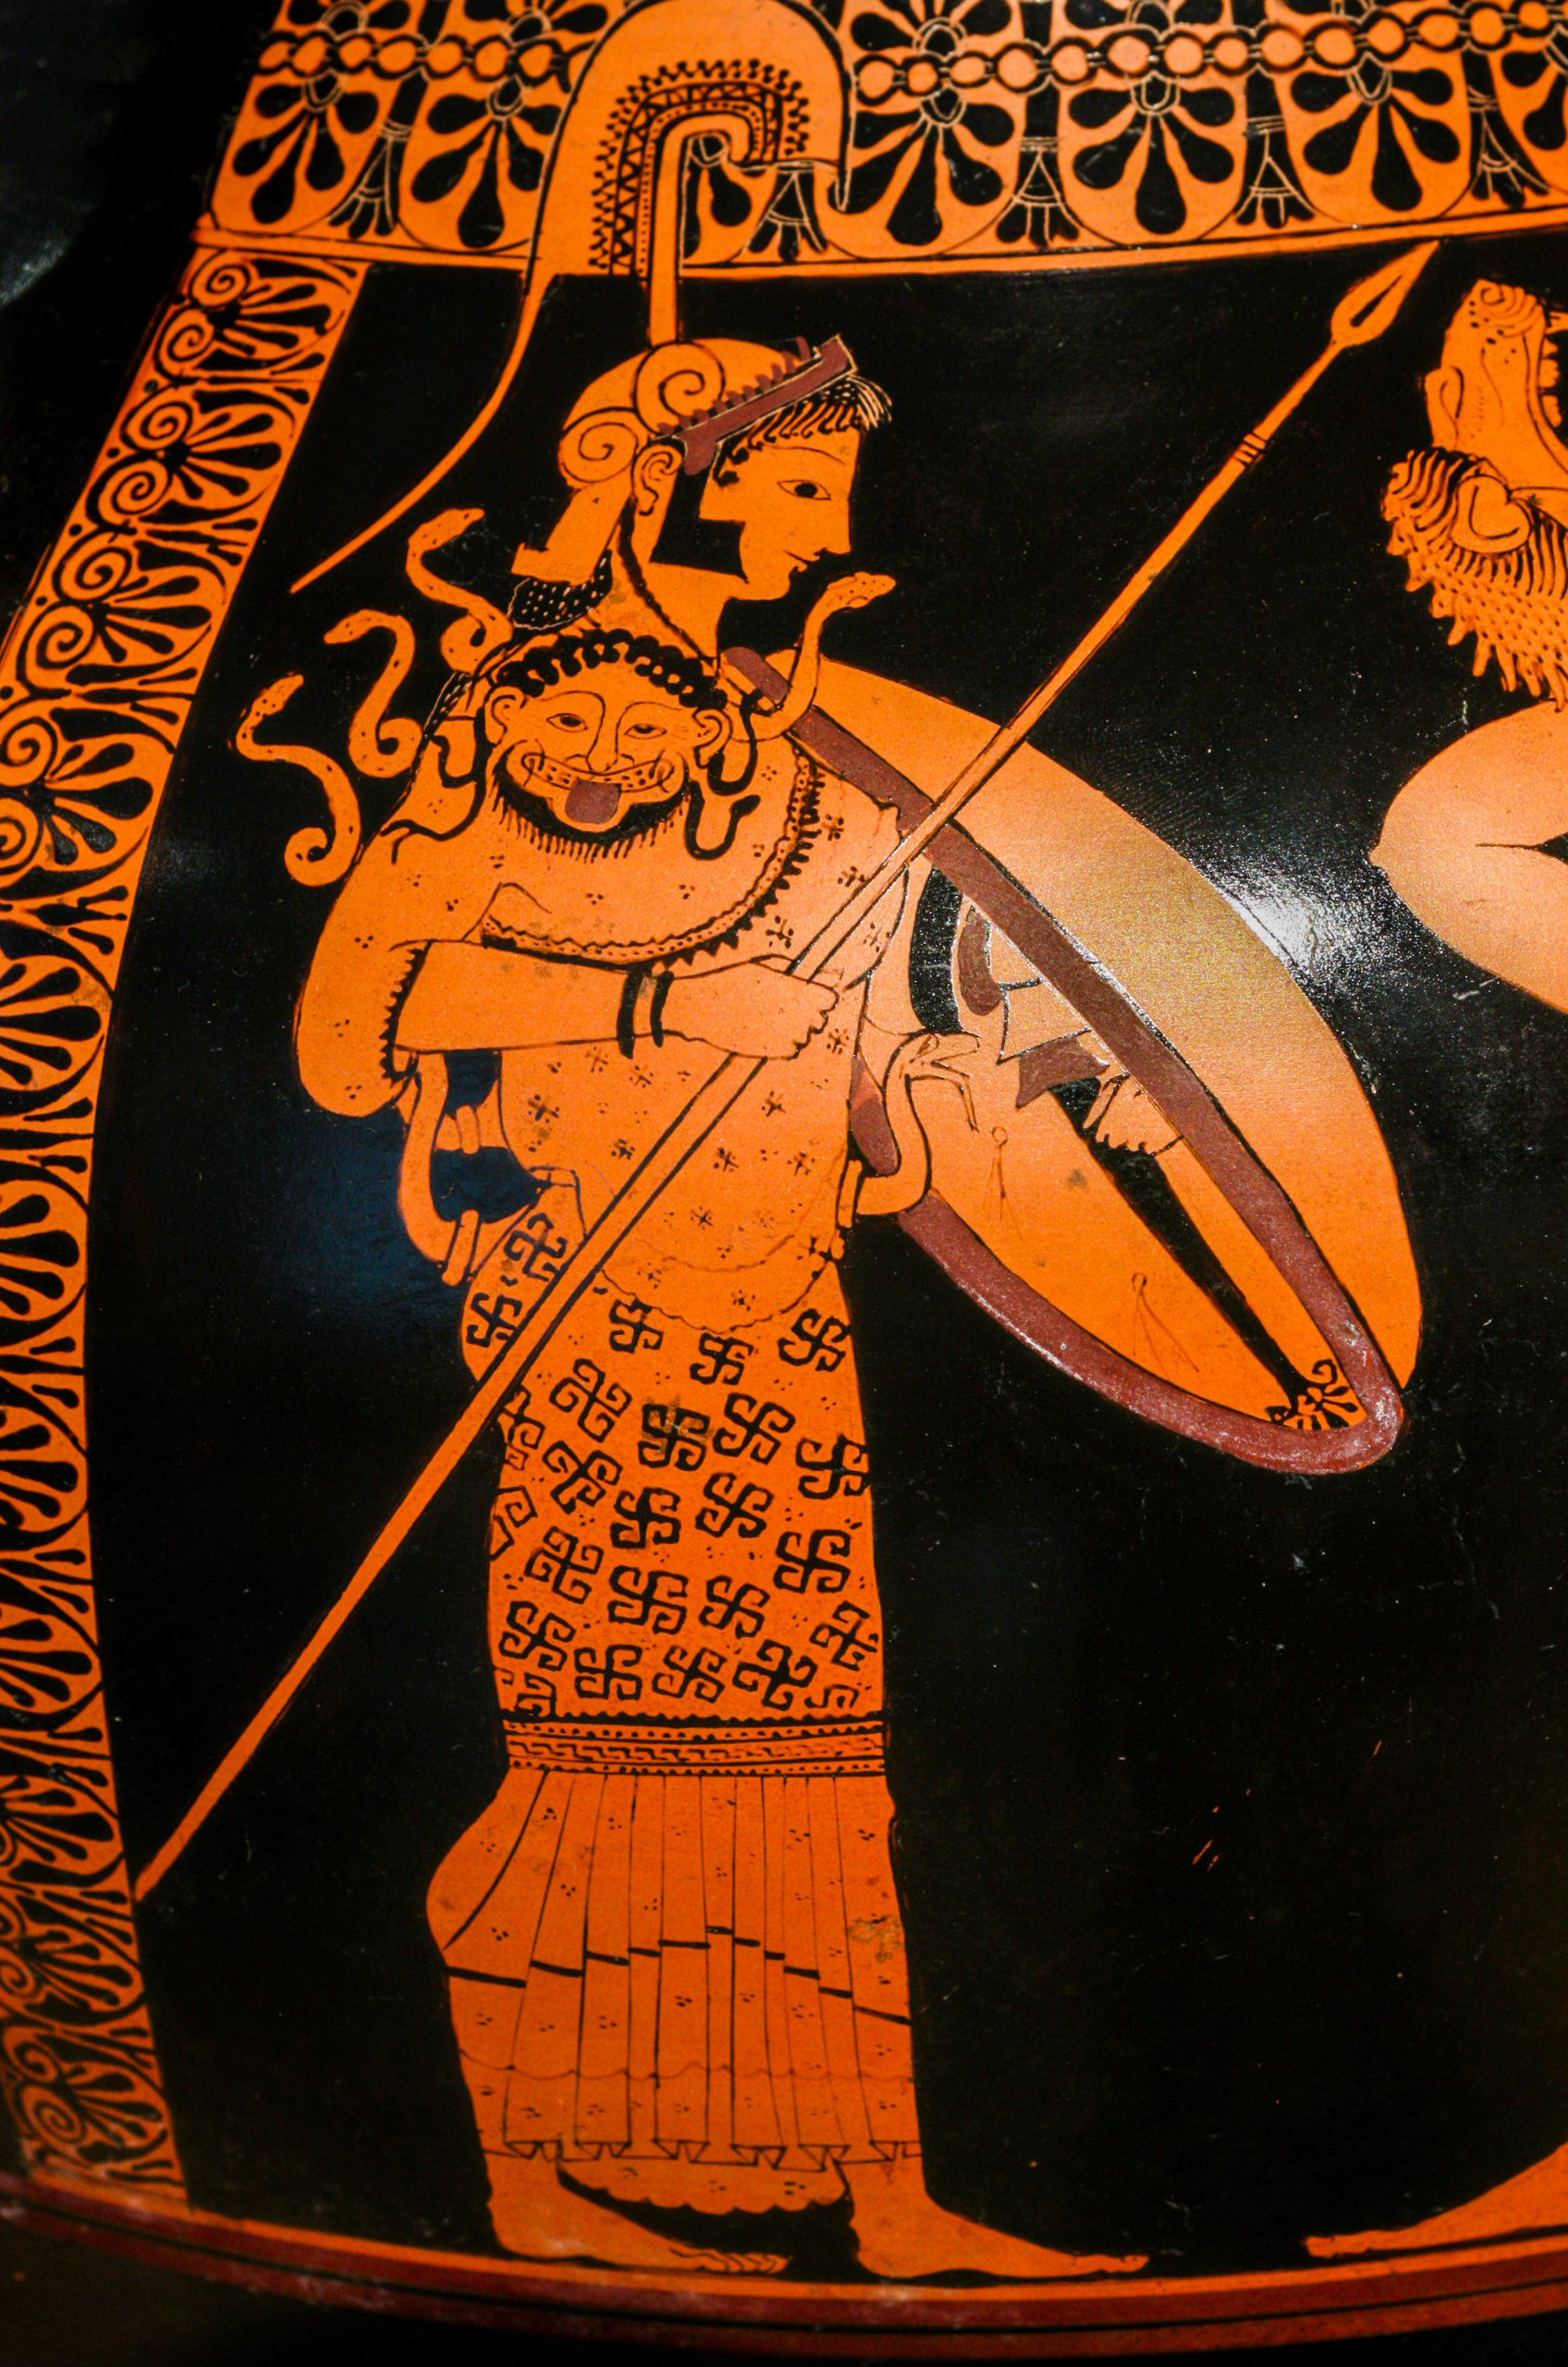 Athena stands holding a spear and shield. She is wearing a helm and the aegis, with the head of Medusa clearly visible on it.